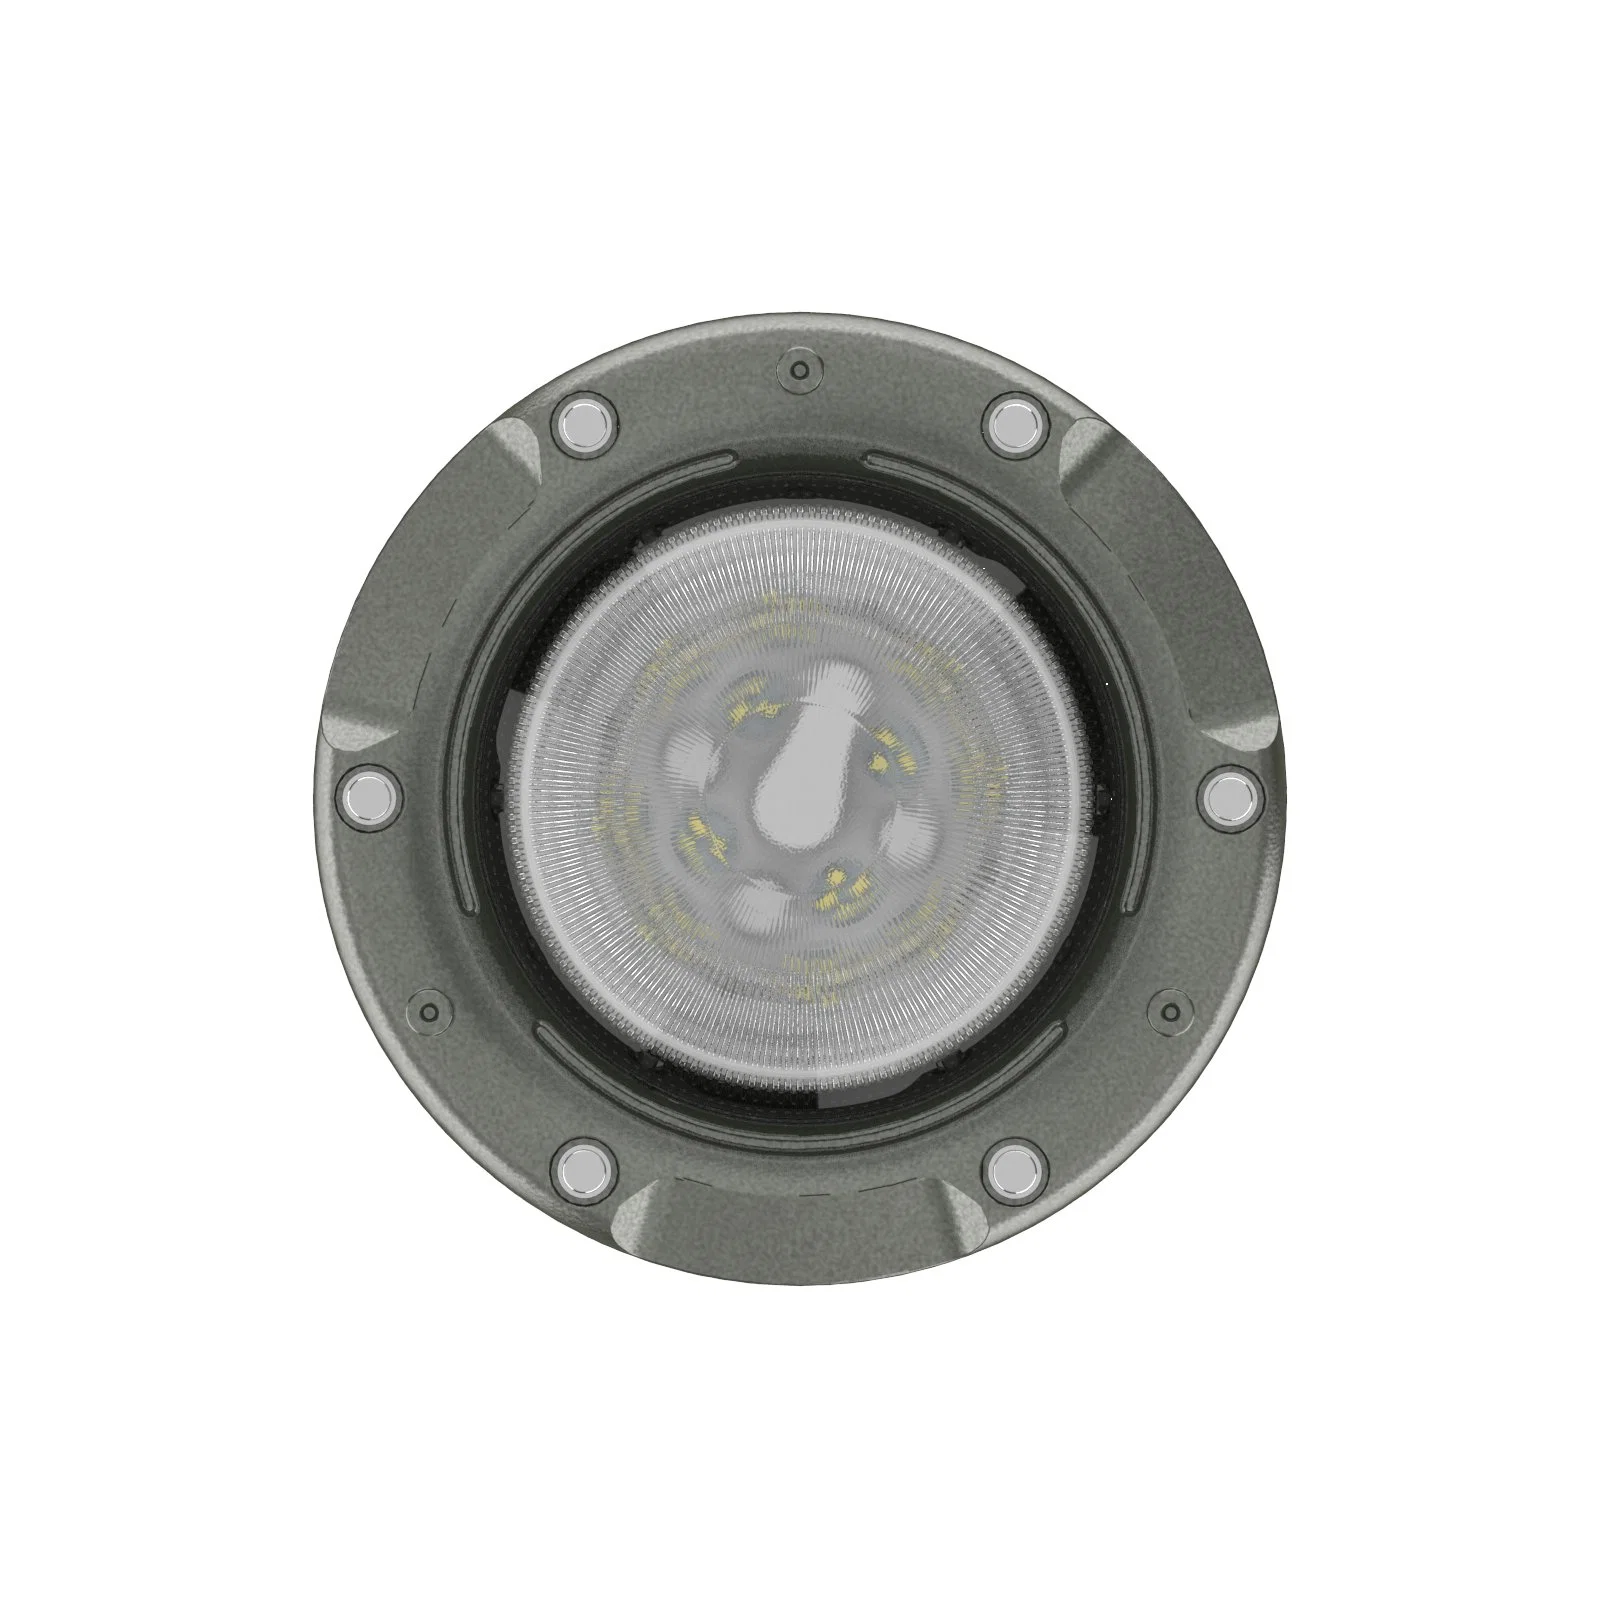 Hot Selling LED Explosion Proof Lighting Fixture ceiling Light Fixtures